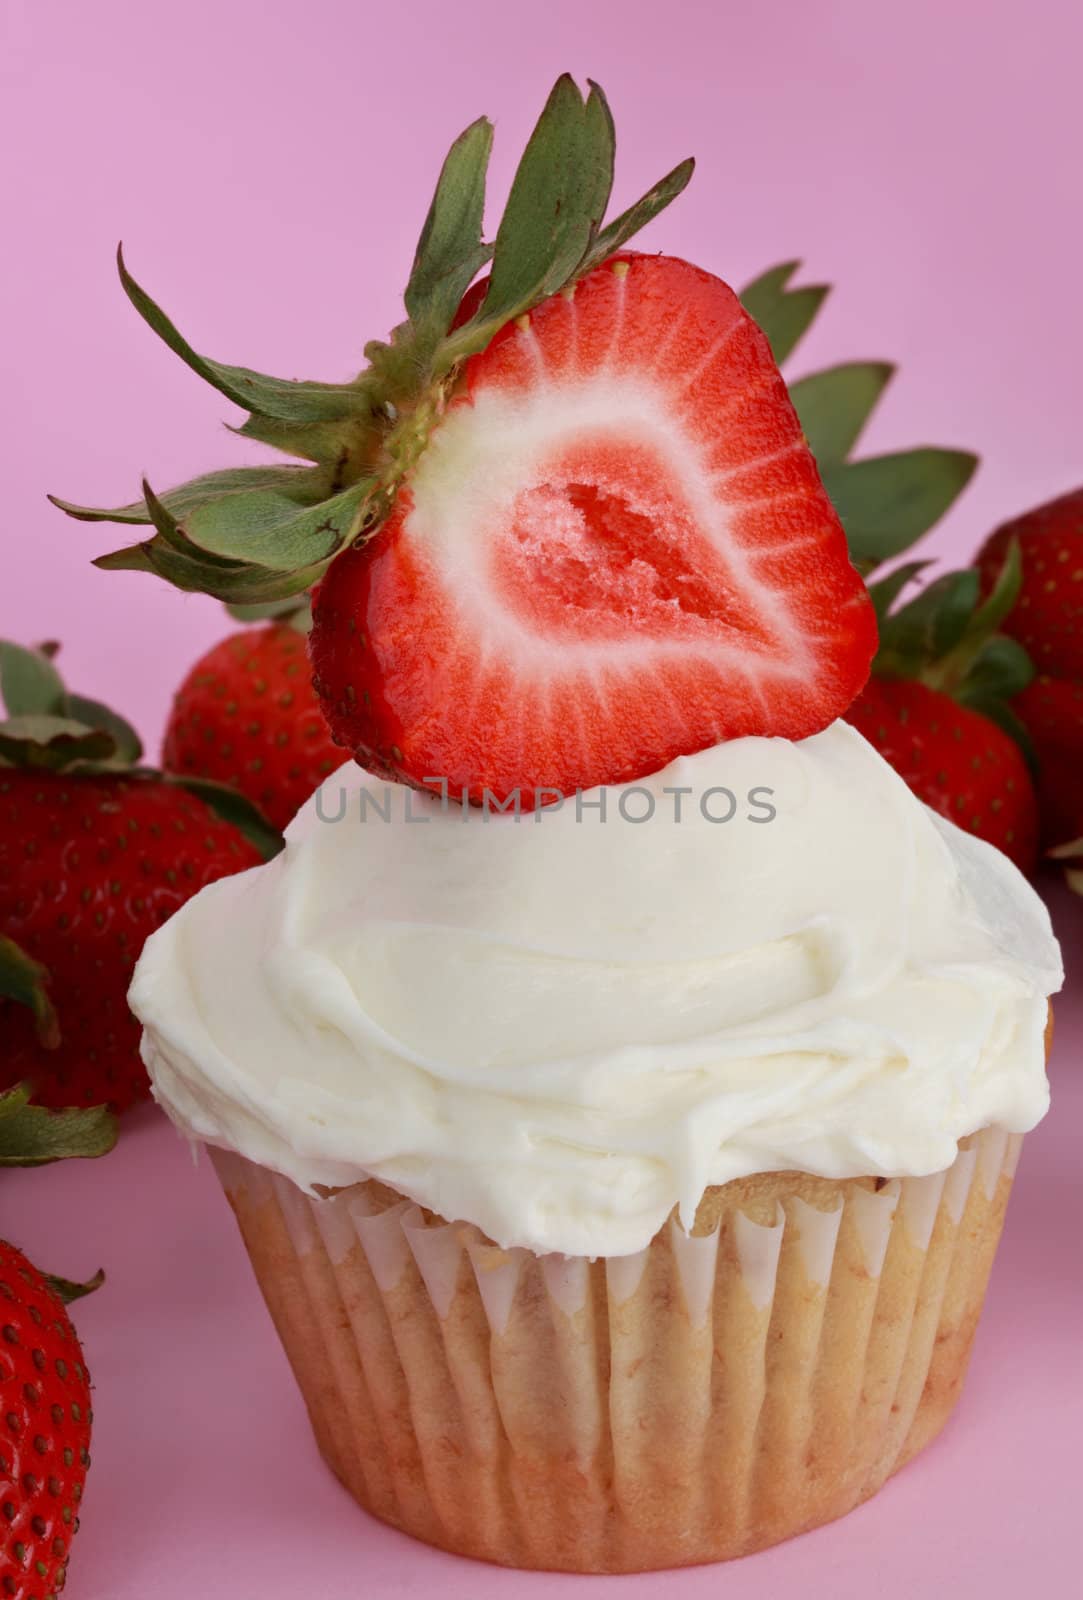 cupcake with white sugar icing and strawberry, pink background